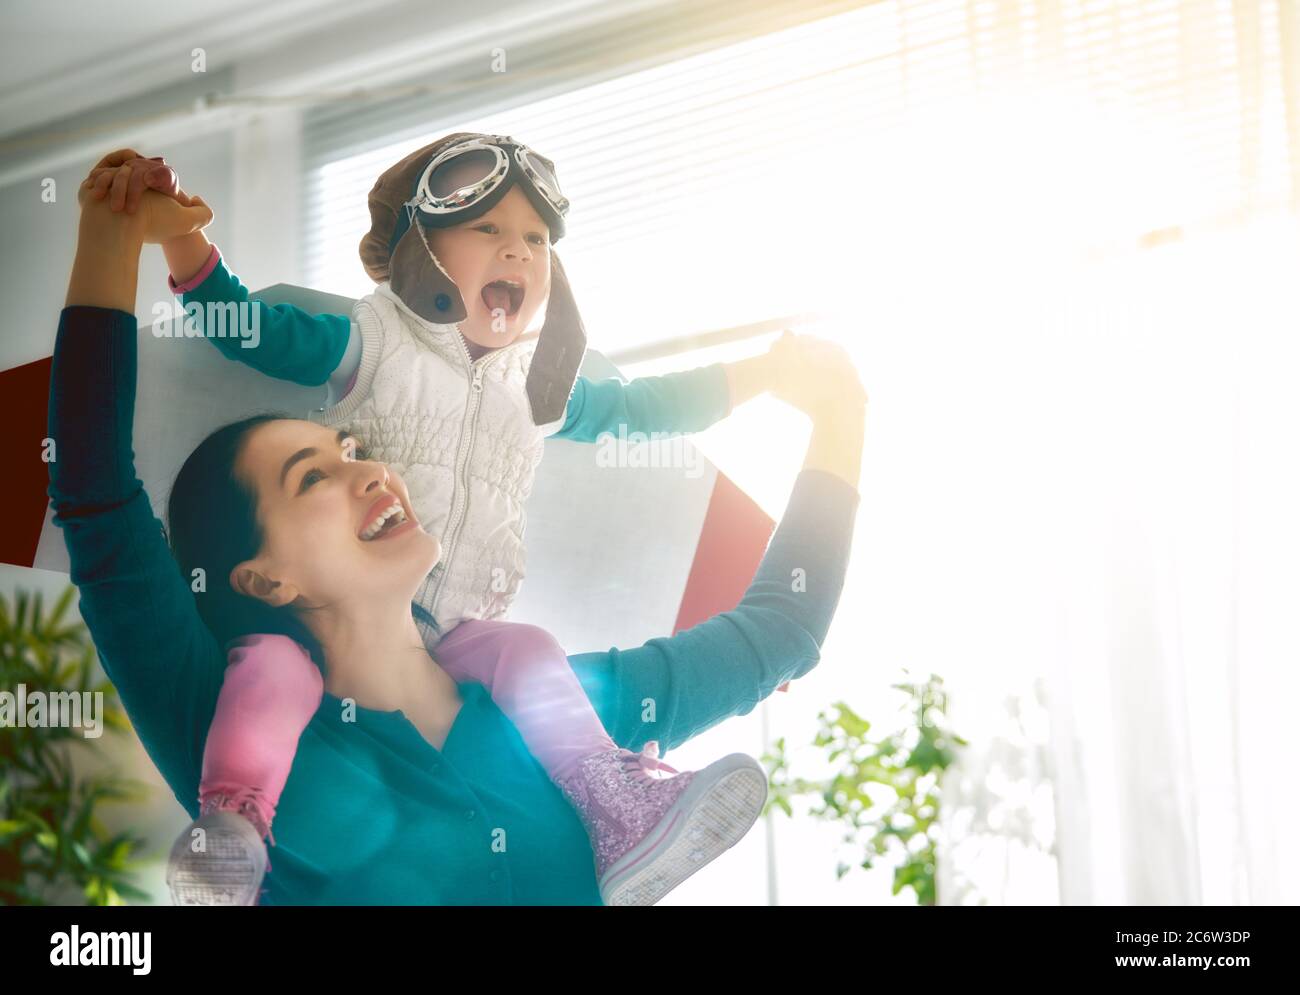 Happy family is having fun at home. Mother and her child girl playing together. Girl in pilot's costume. Stock Photo